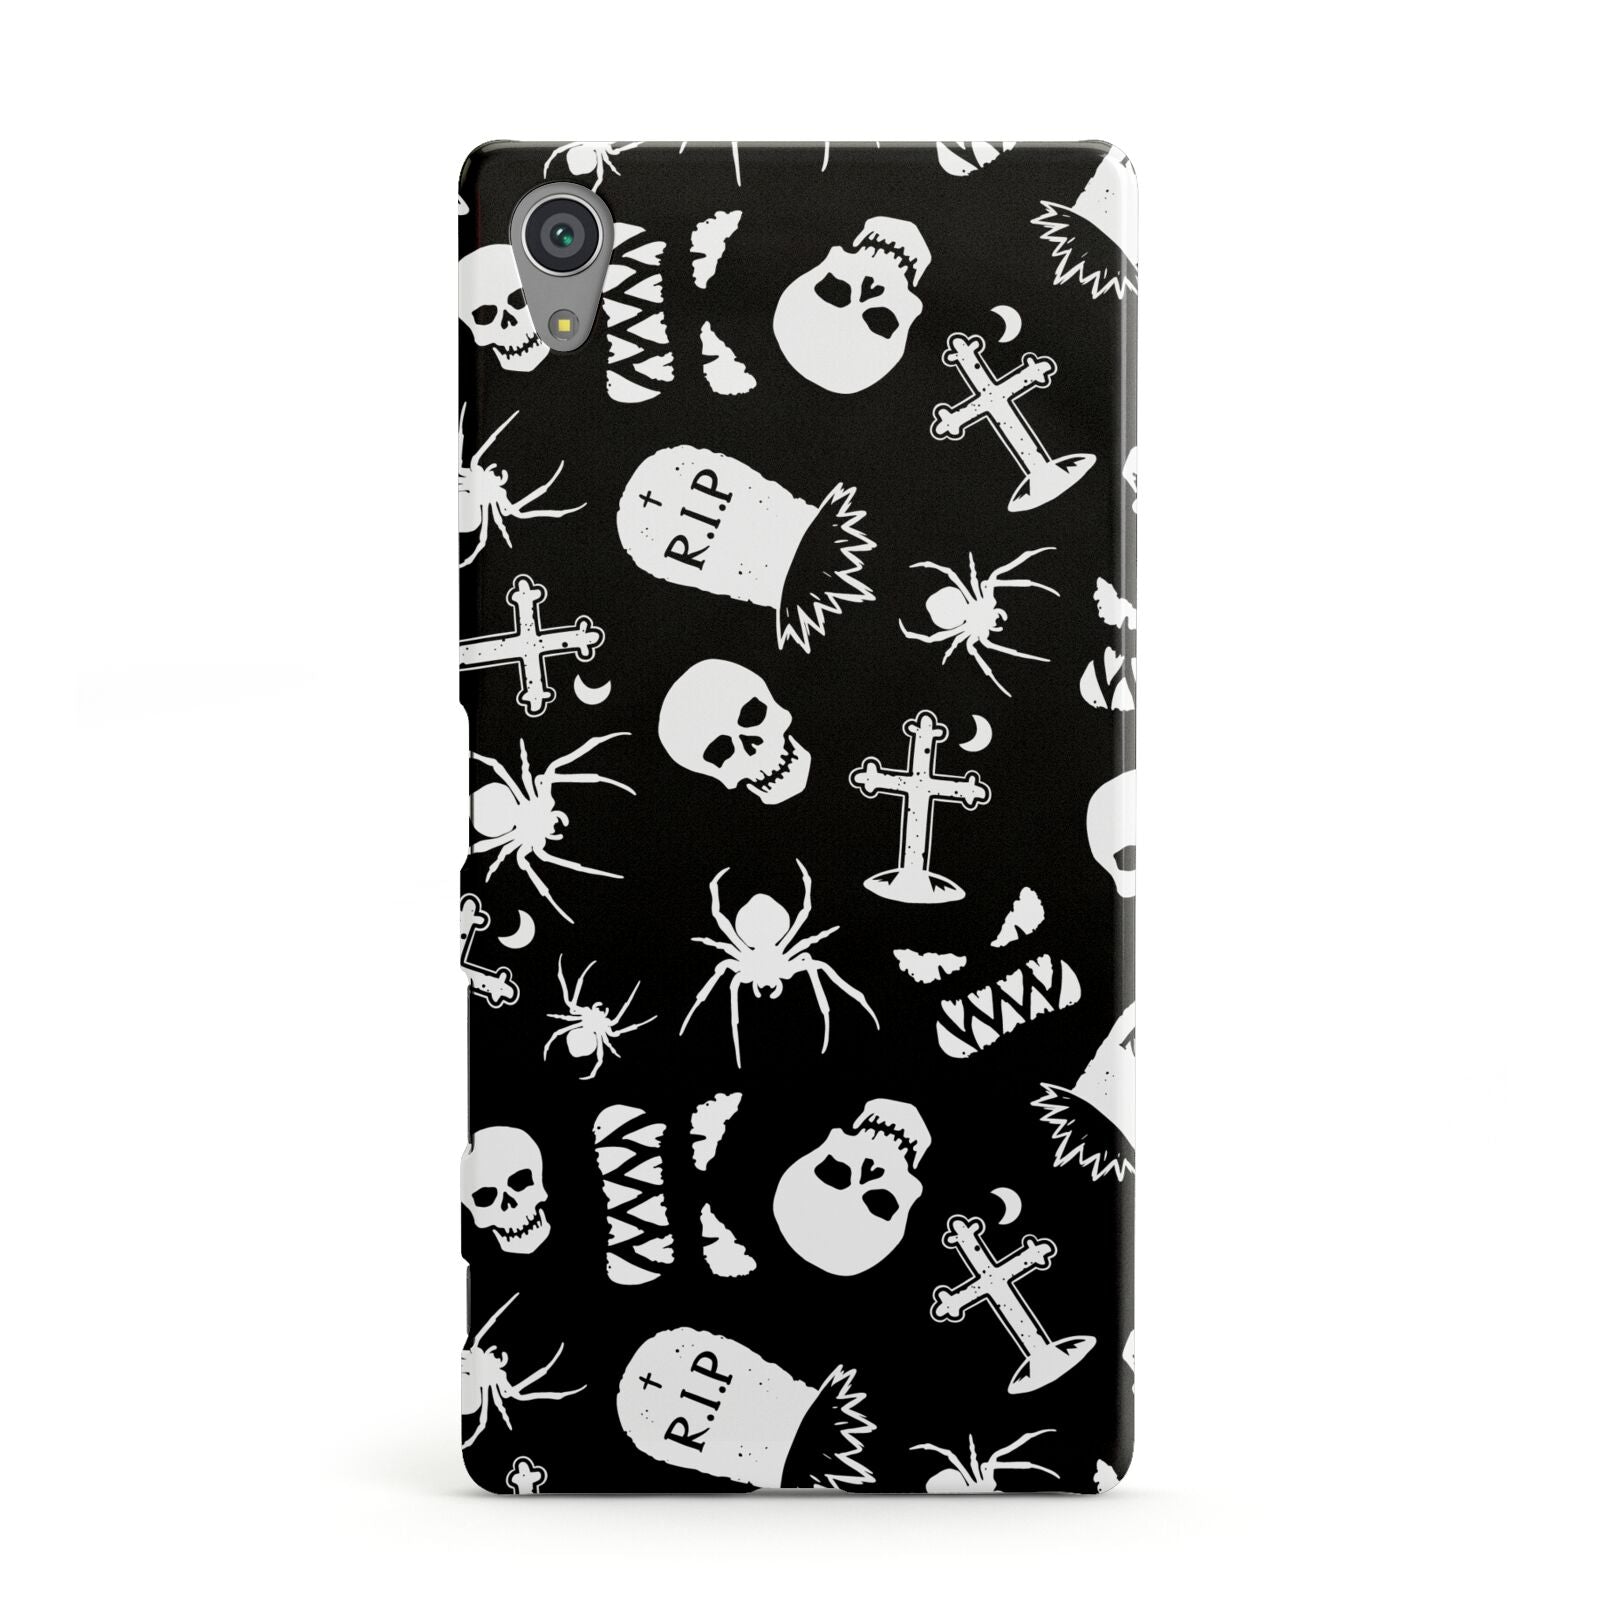 Spooky Illustrations Sony Xperia Case